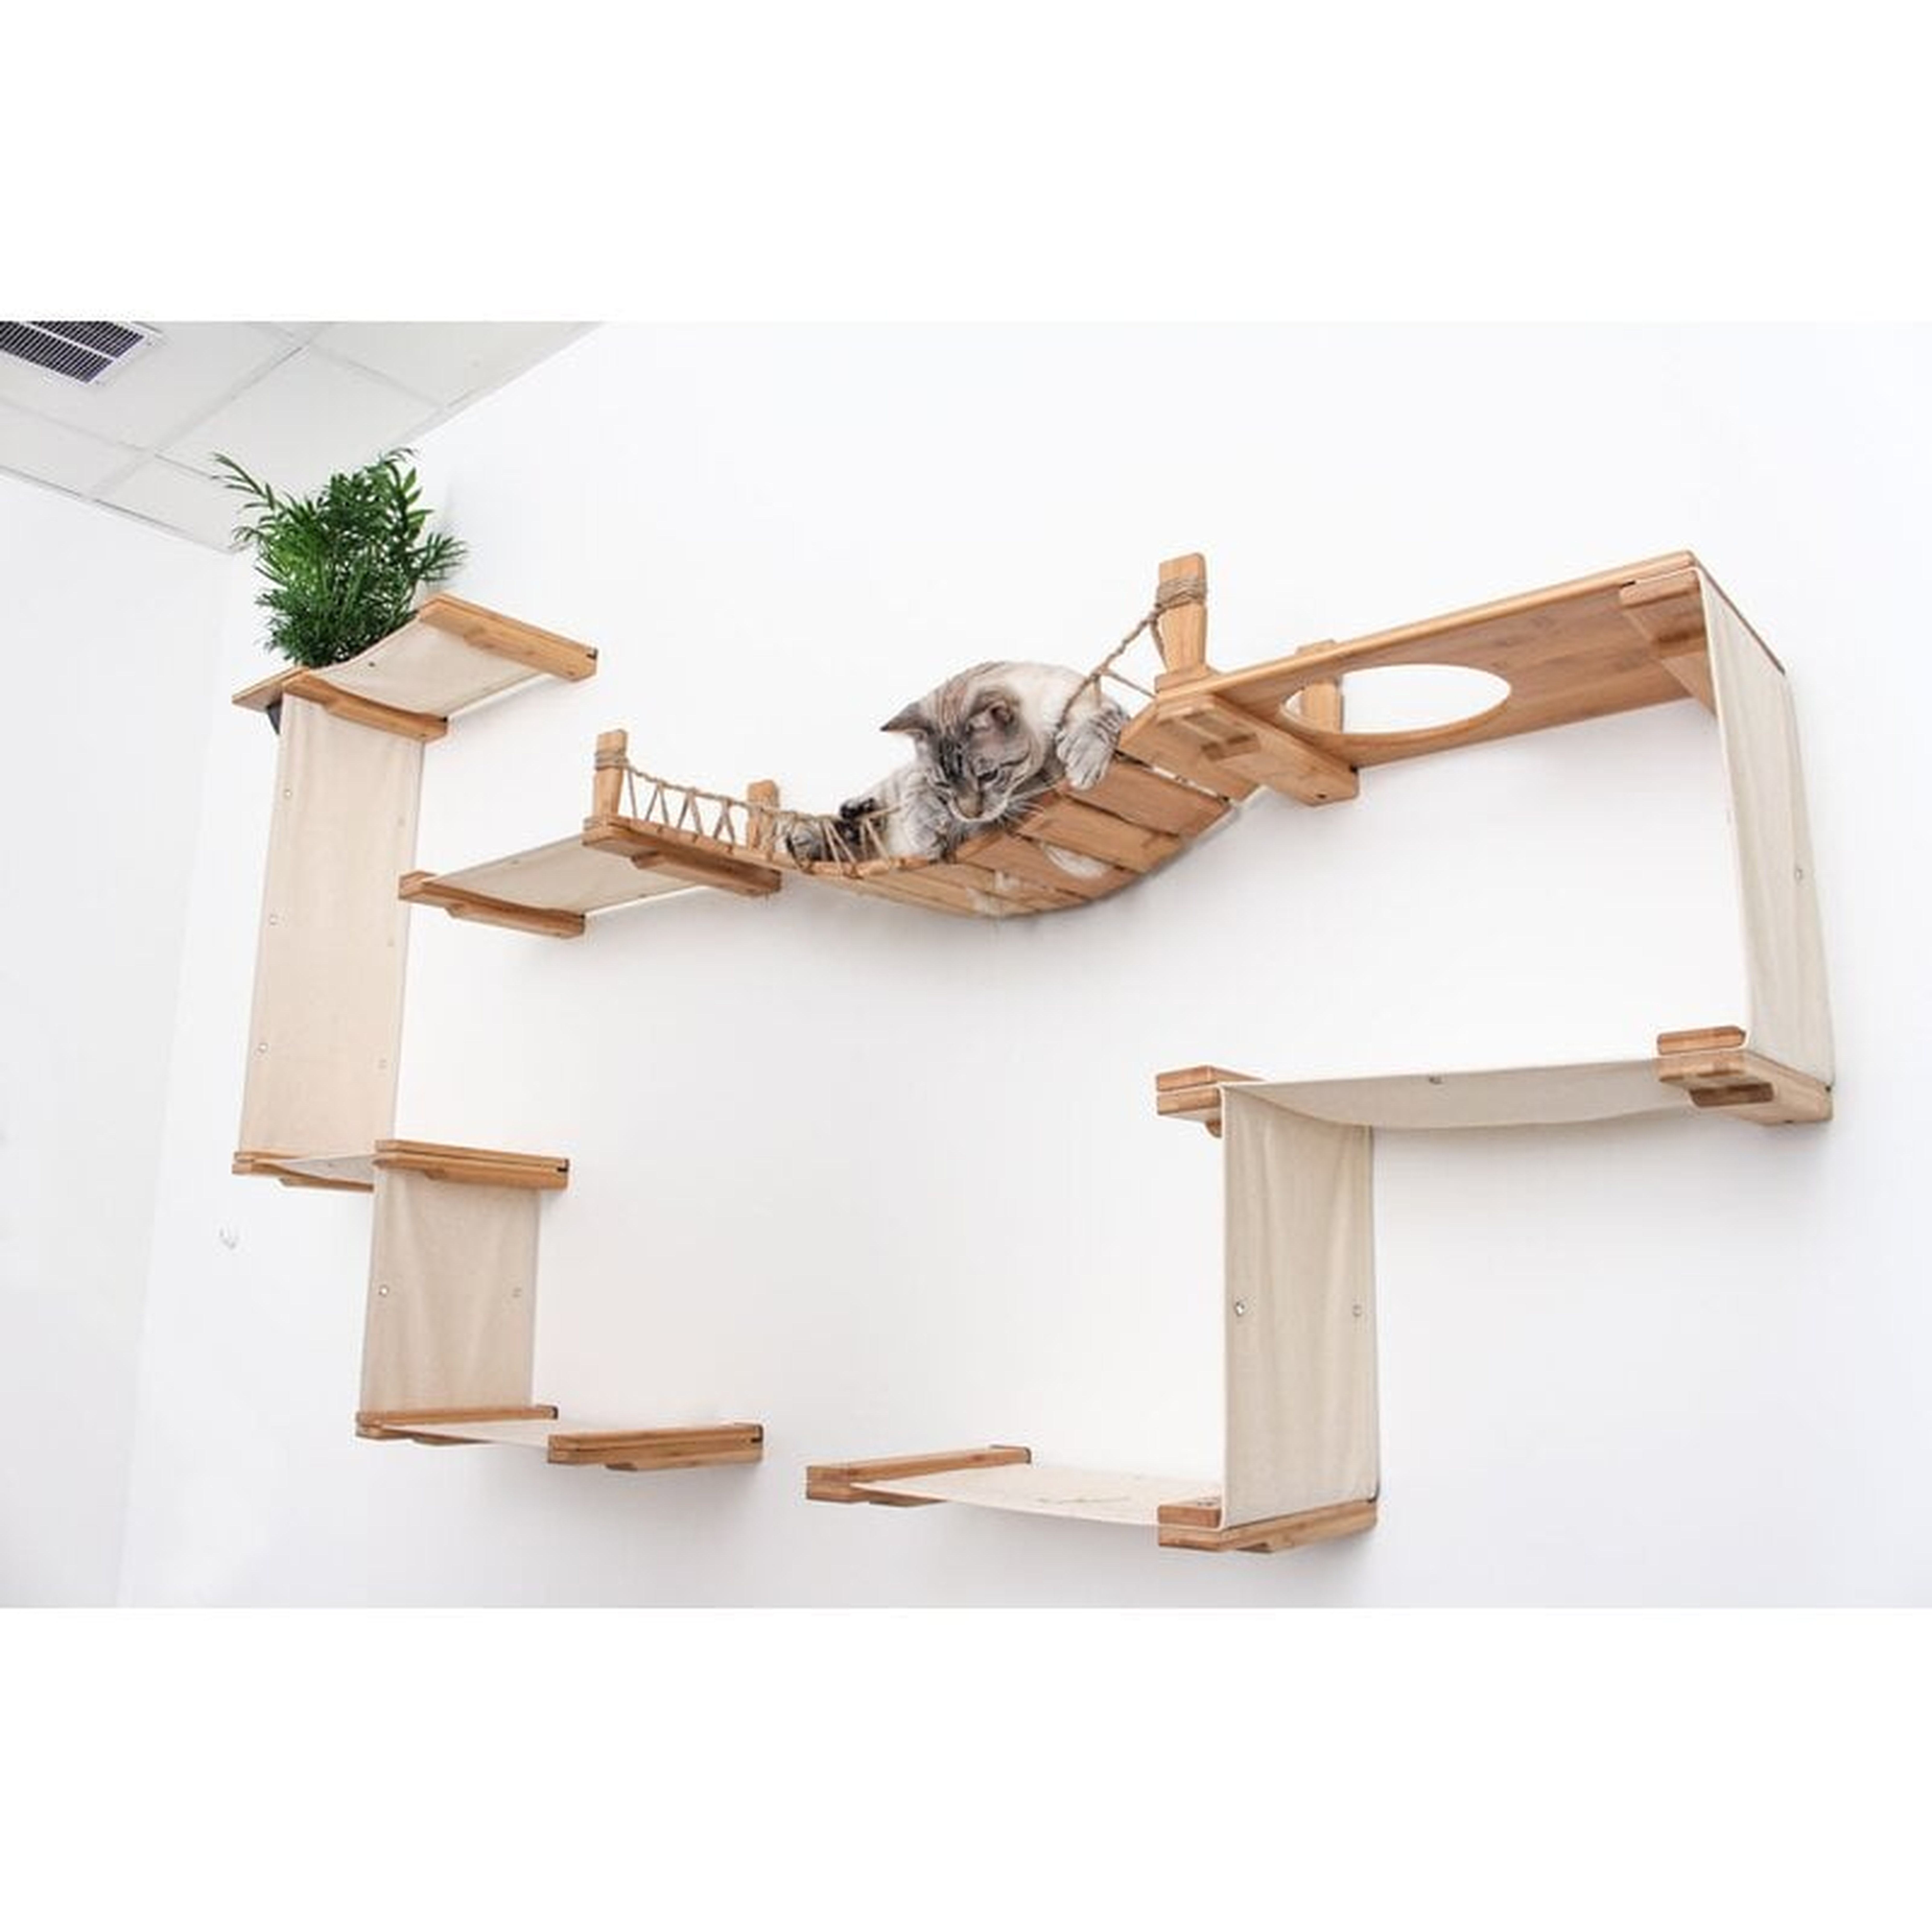 Catastrophicreations Temple Handcrafted Wall Mounted Cat Tree Shelves Natural/Charcoal One Size - Wayfair